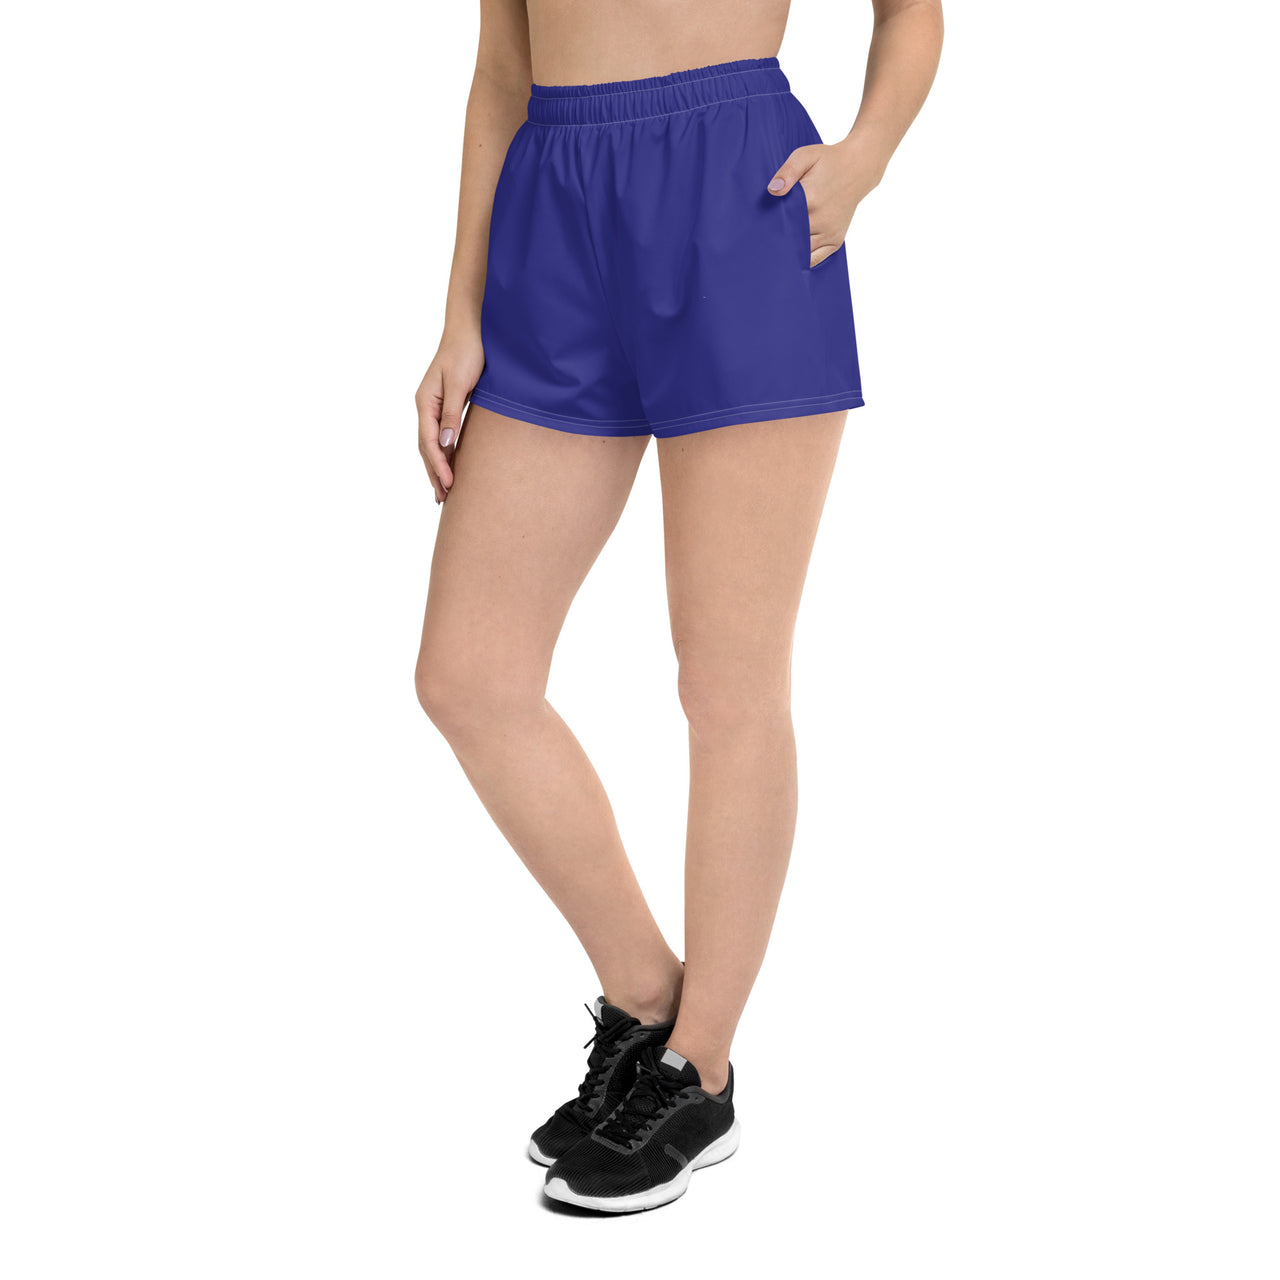 Women’s Recycled Solid Athletic Shorts - Dark Slate Blue SHAVA CO